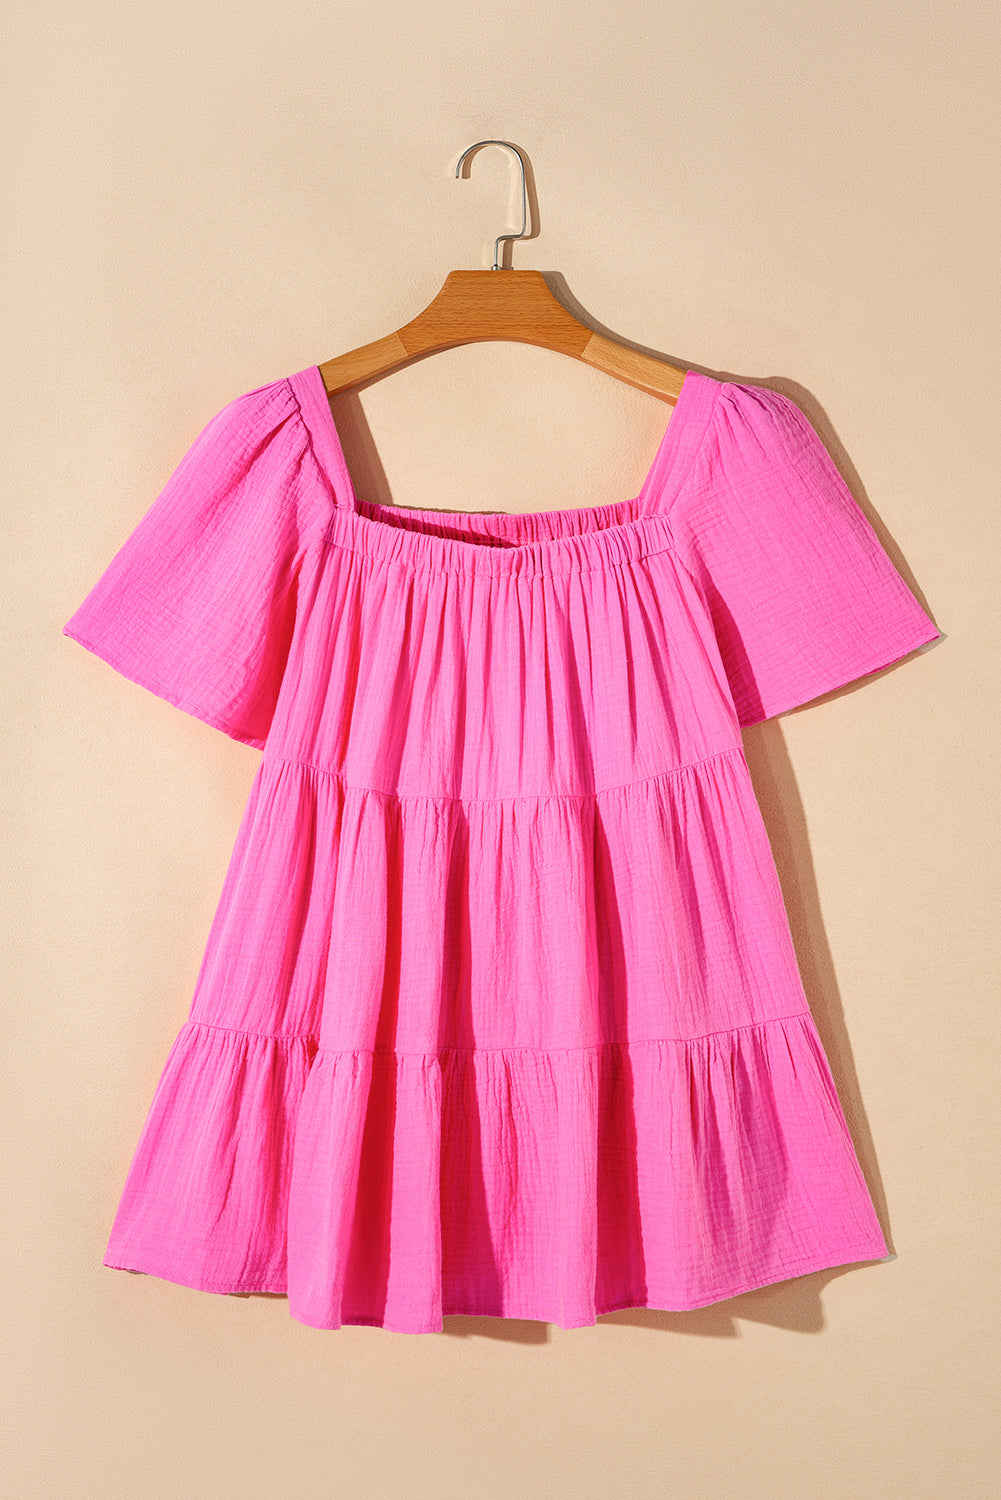 Bright Pink Textured Square Neck Flutter Sleeve Tiered Flowy Blouse